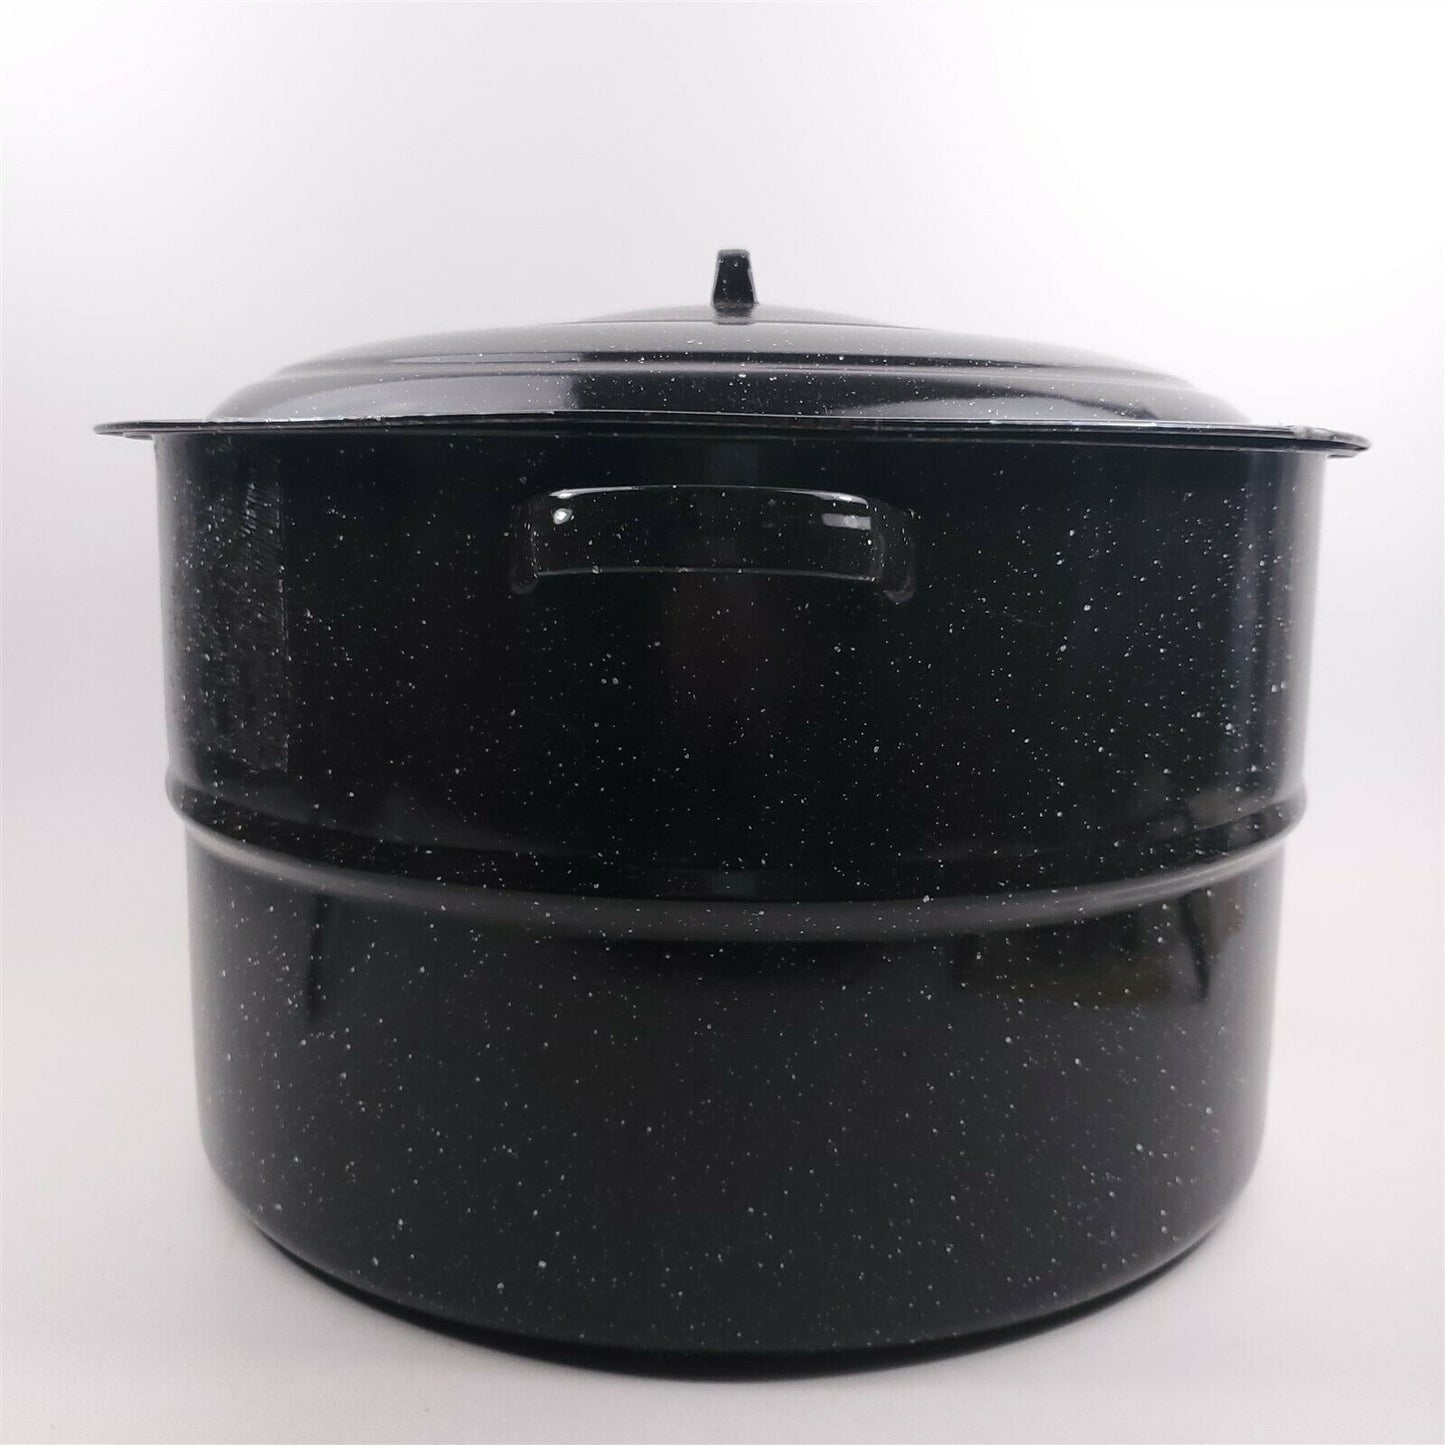 Cookware Vintage Canning StockPot Black Speckled XL w/ Wire Rack